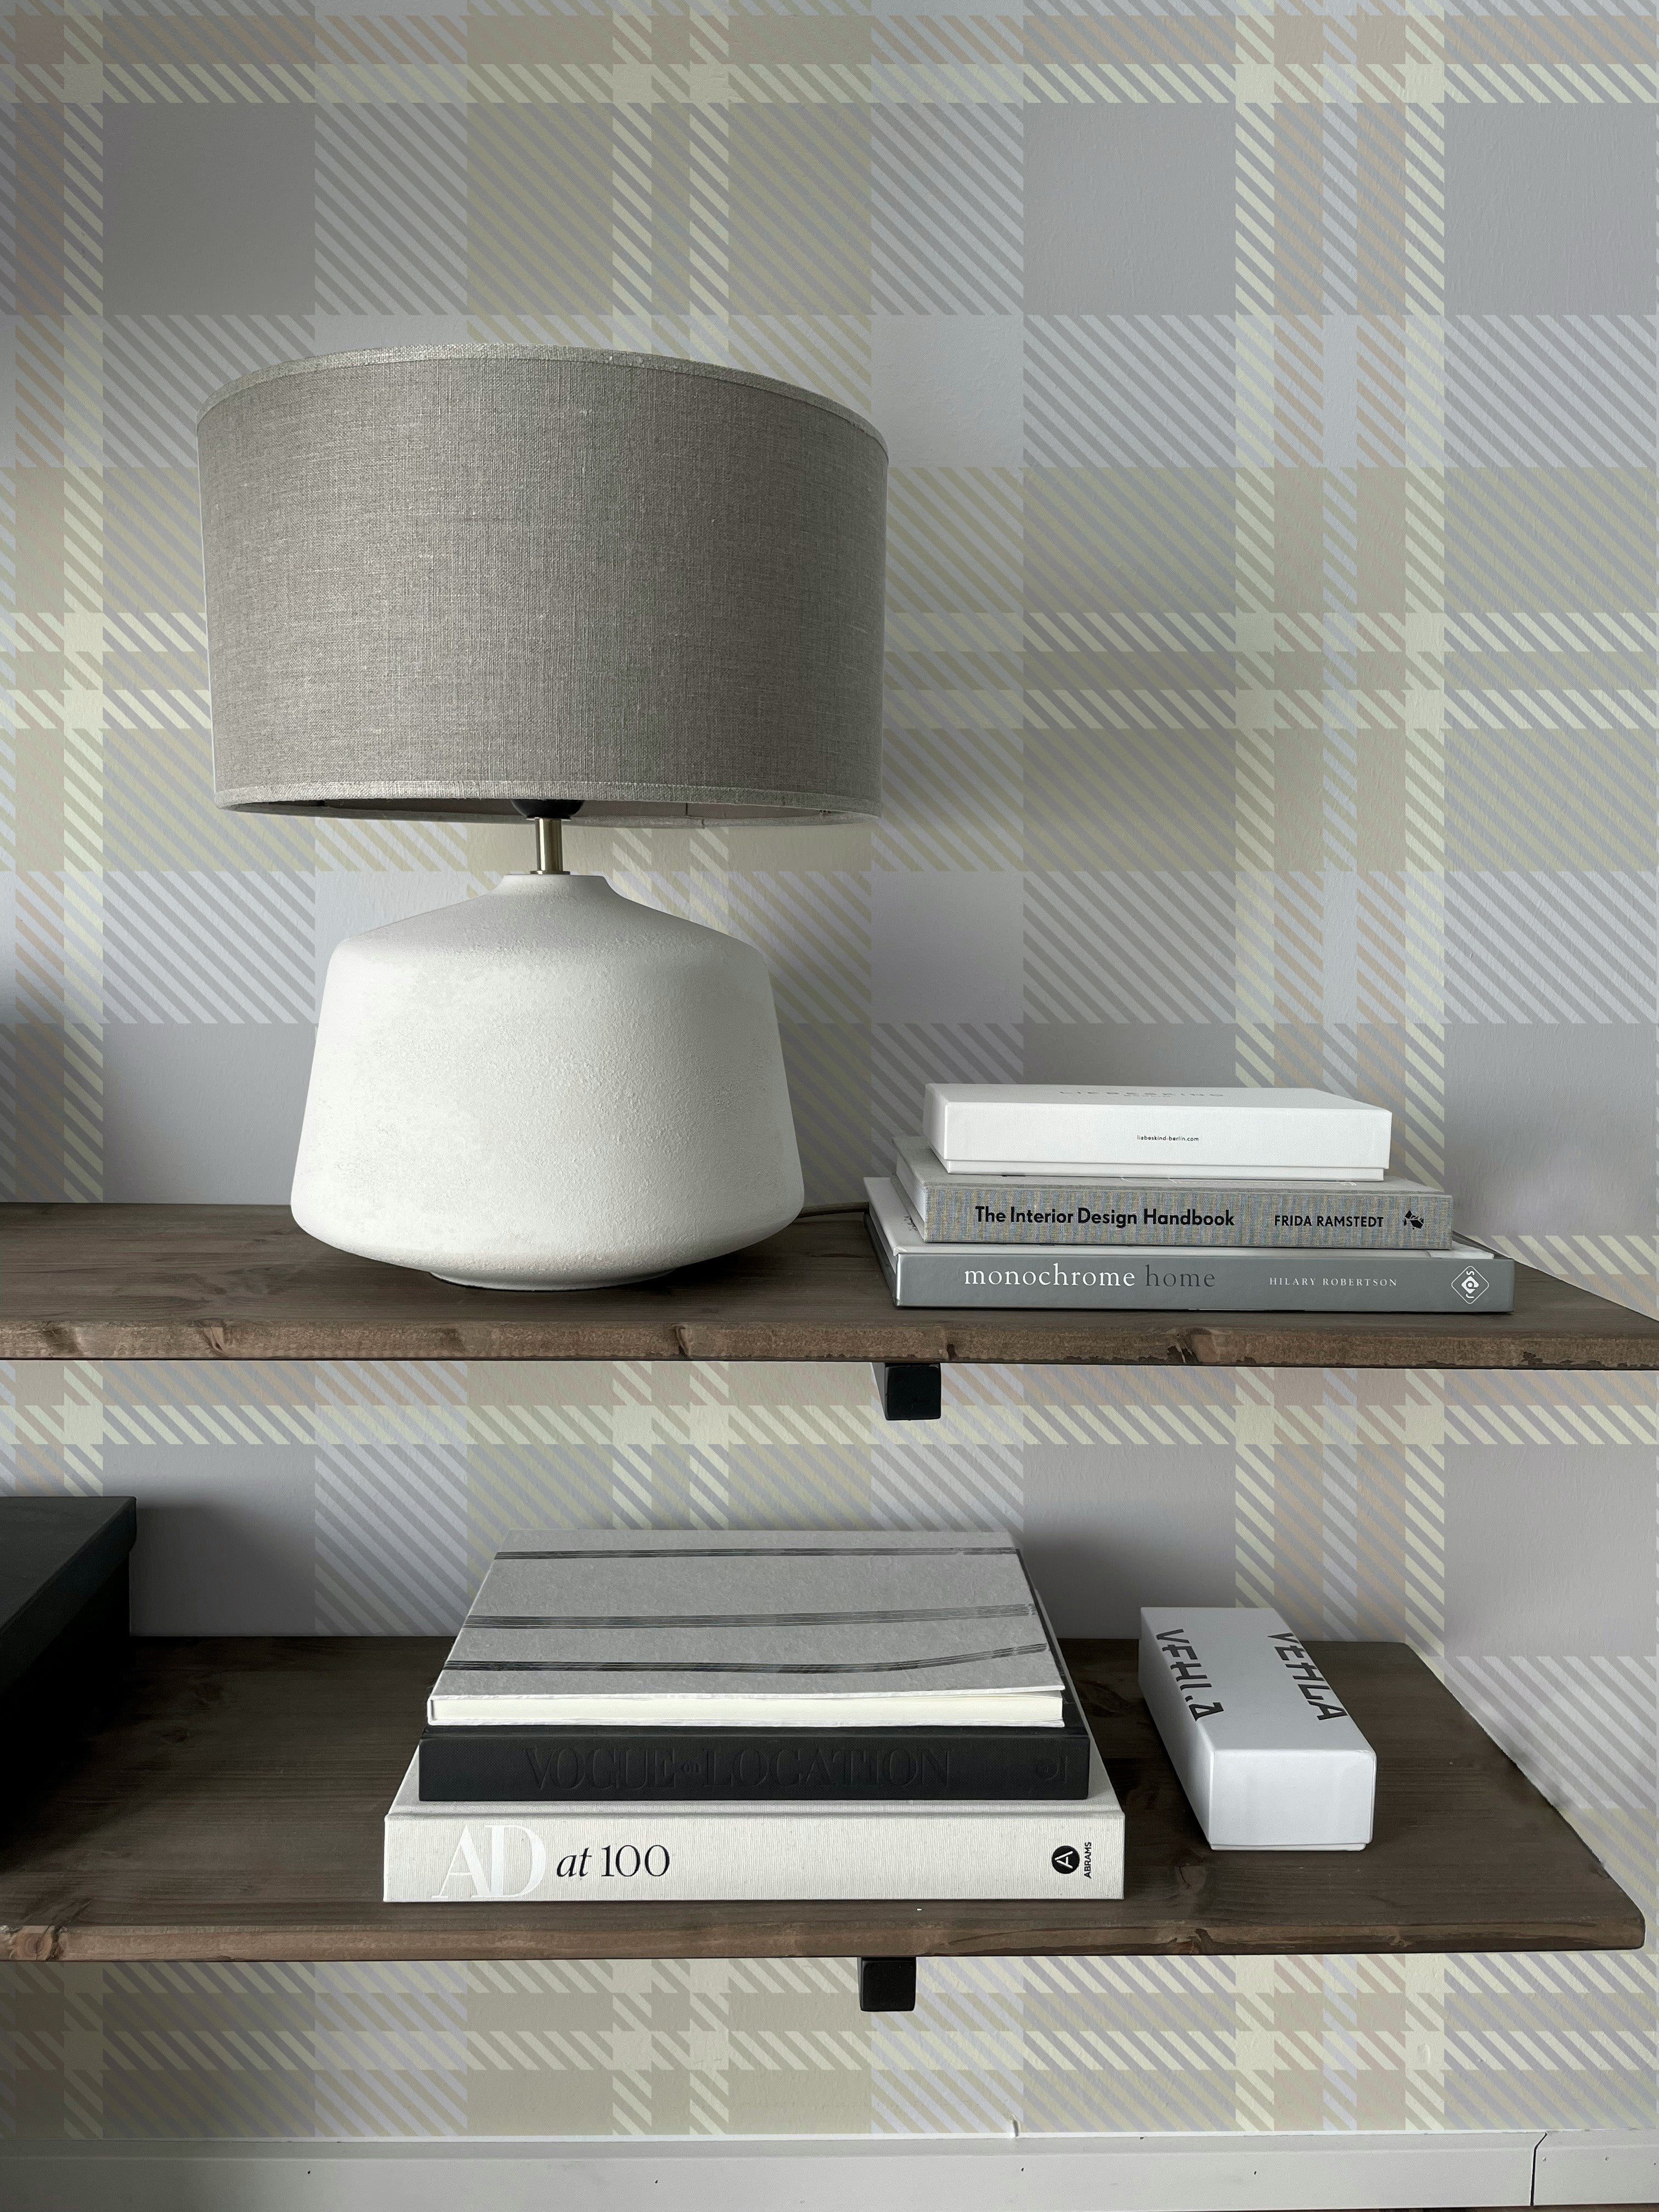 Close-up view of a shelf styled against Heirloom Tartan Plaid Wallpaper, displaying a lamp and books. The wallpaper's neutral tartan pattern adds a subtle yet elegant touch to the decor